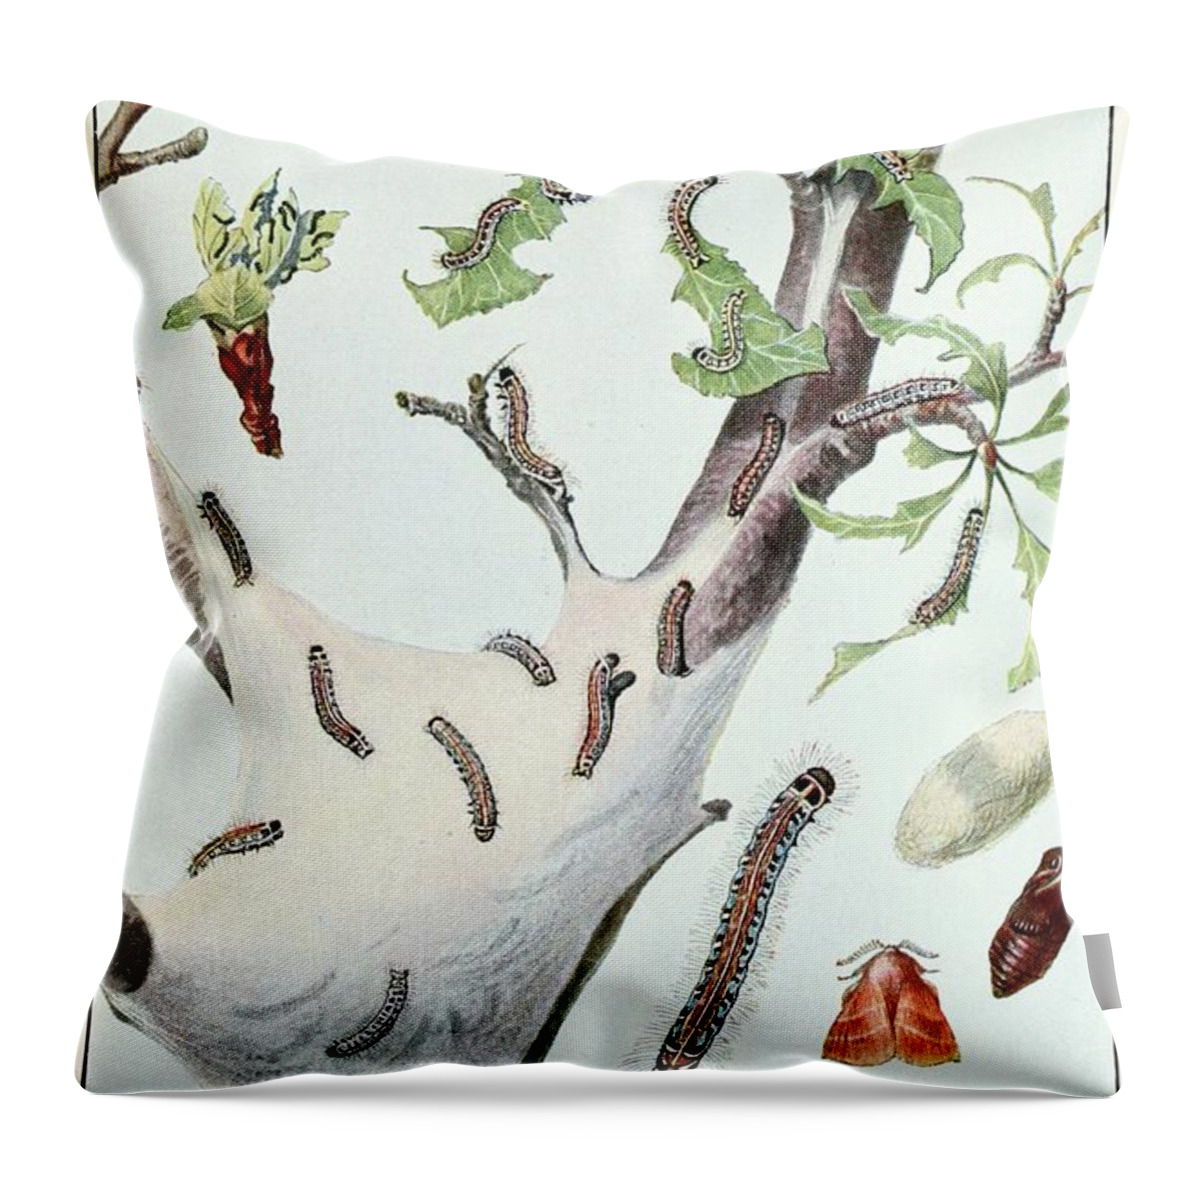 Illustration Throw Pillow featuring the painting The Tent Caterpillar by Robert Evans Snodgrass